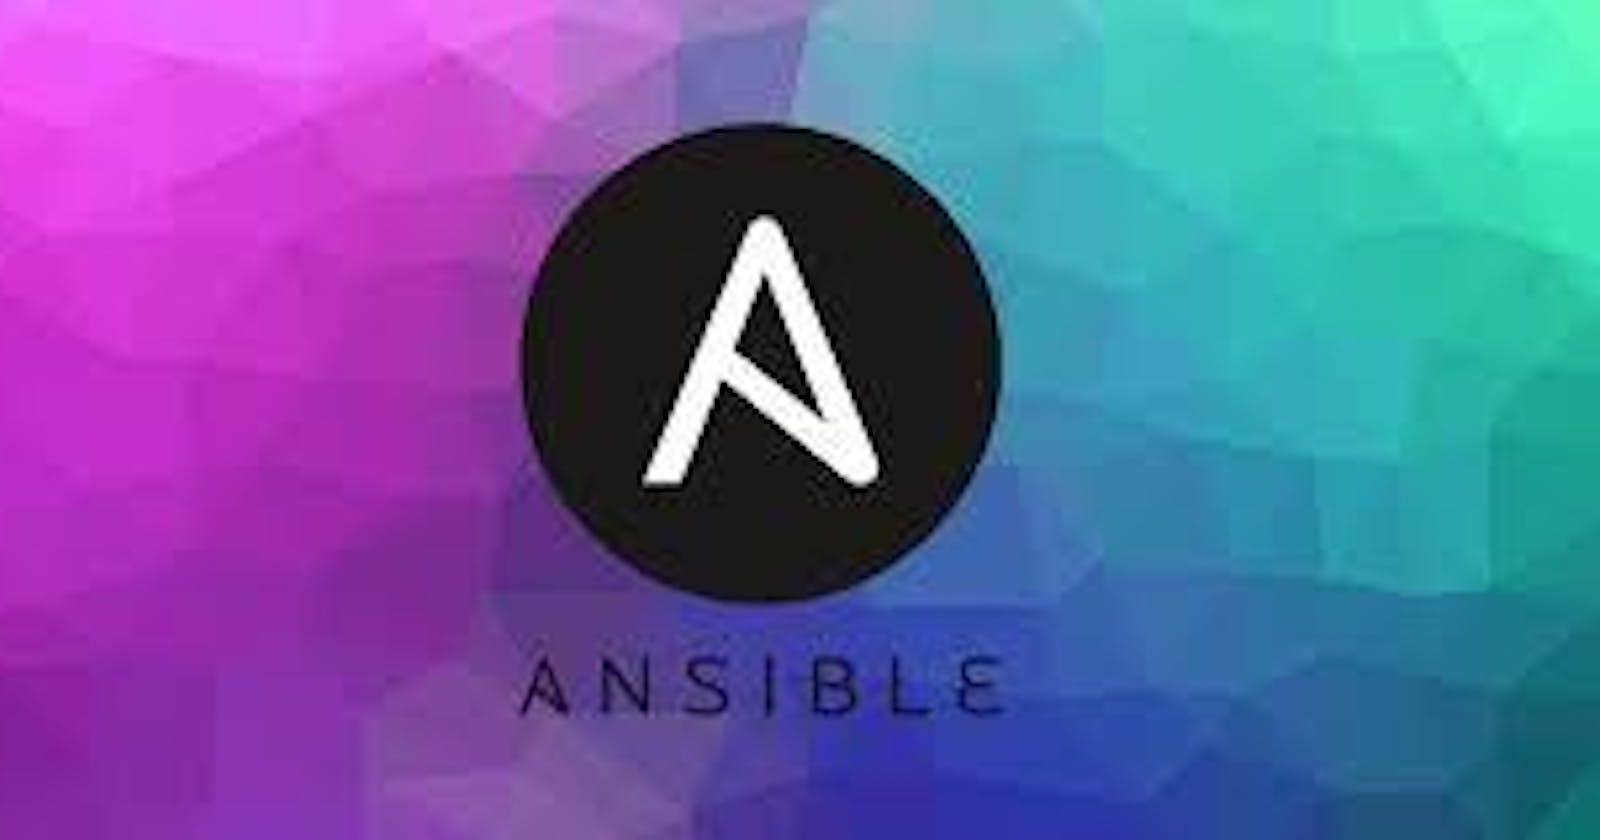 Day 55: Understanding Configuration Management with Ansible